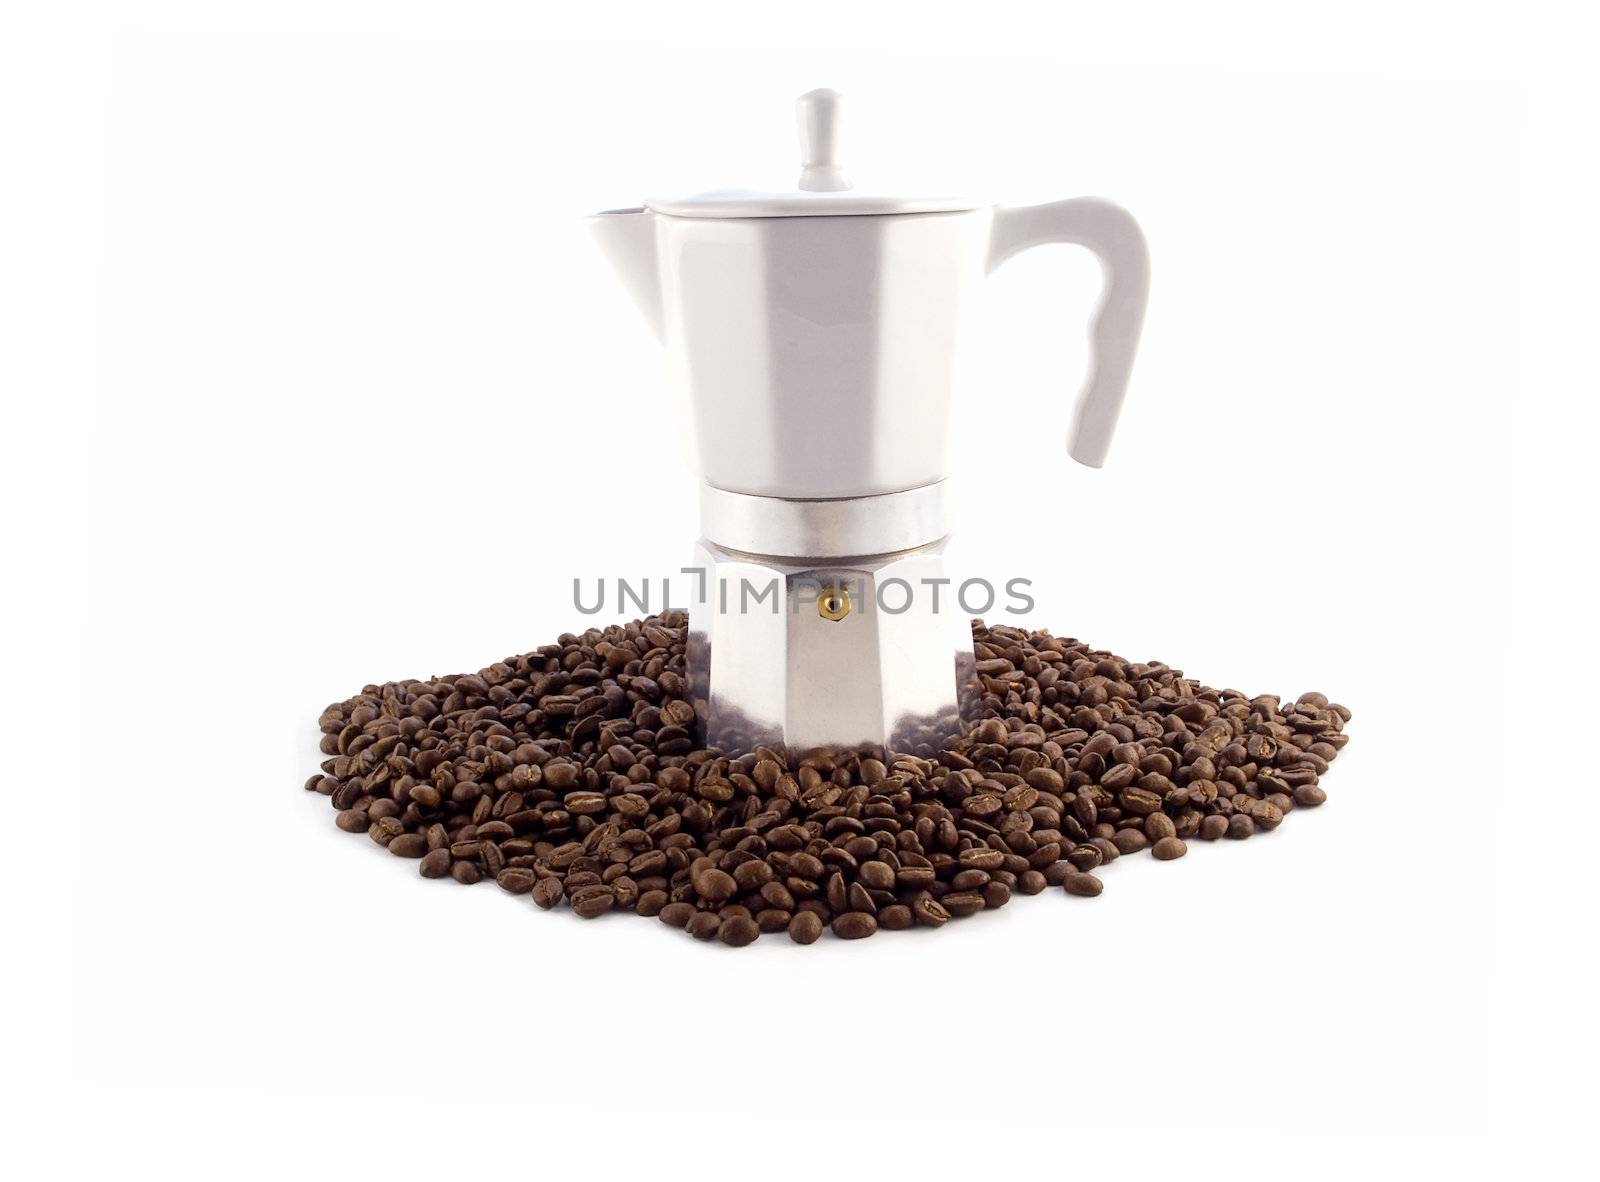  traditional vacuum coffee maker "Little Man" isolated on white